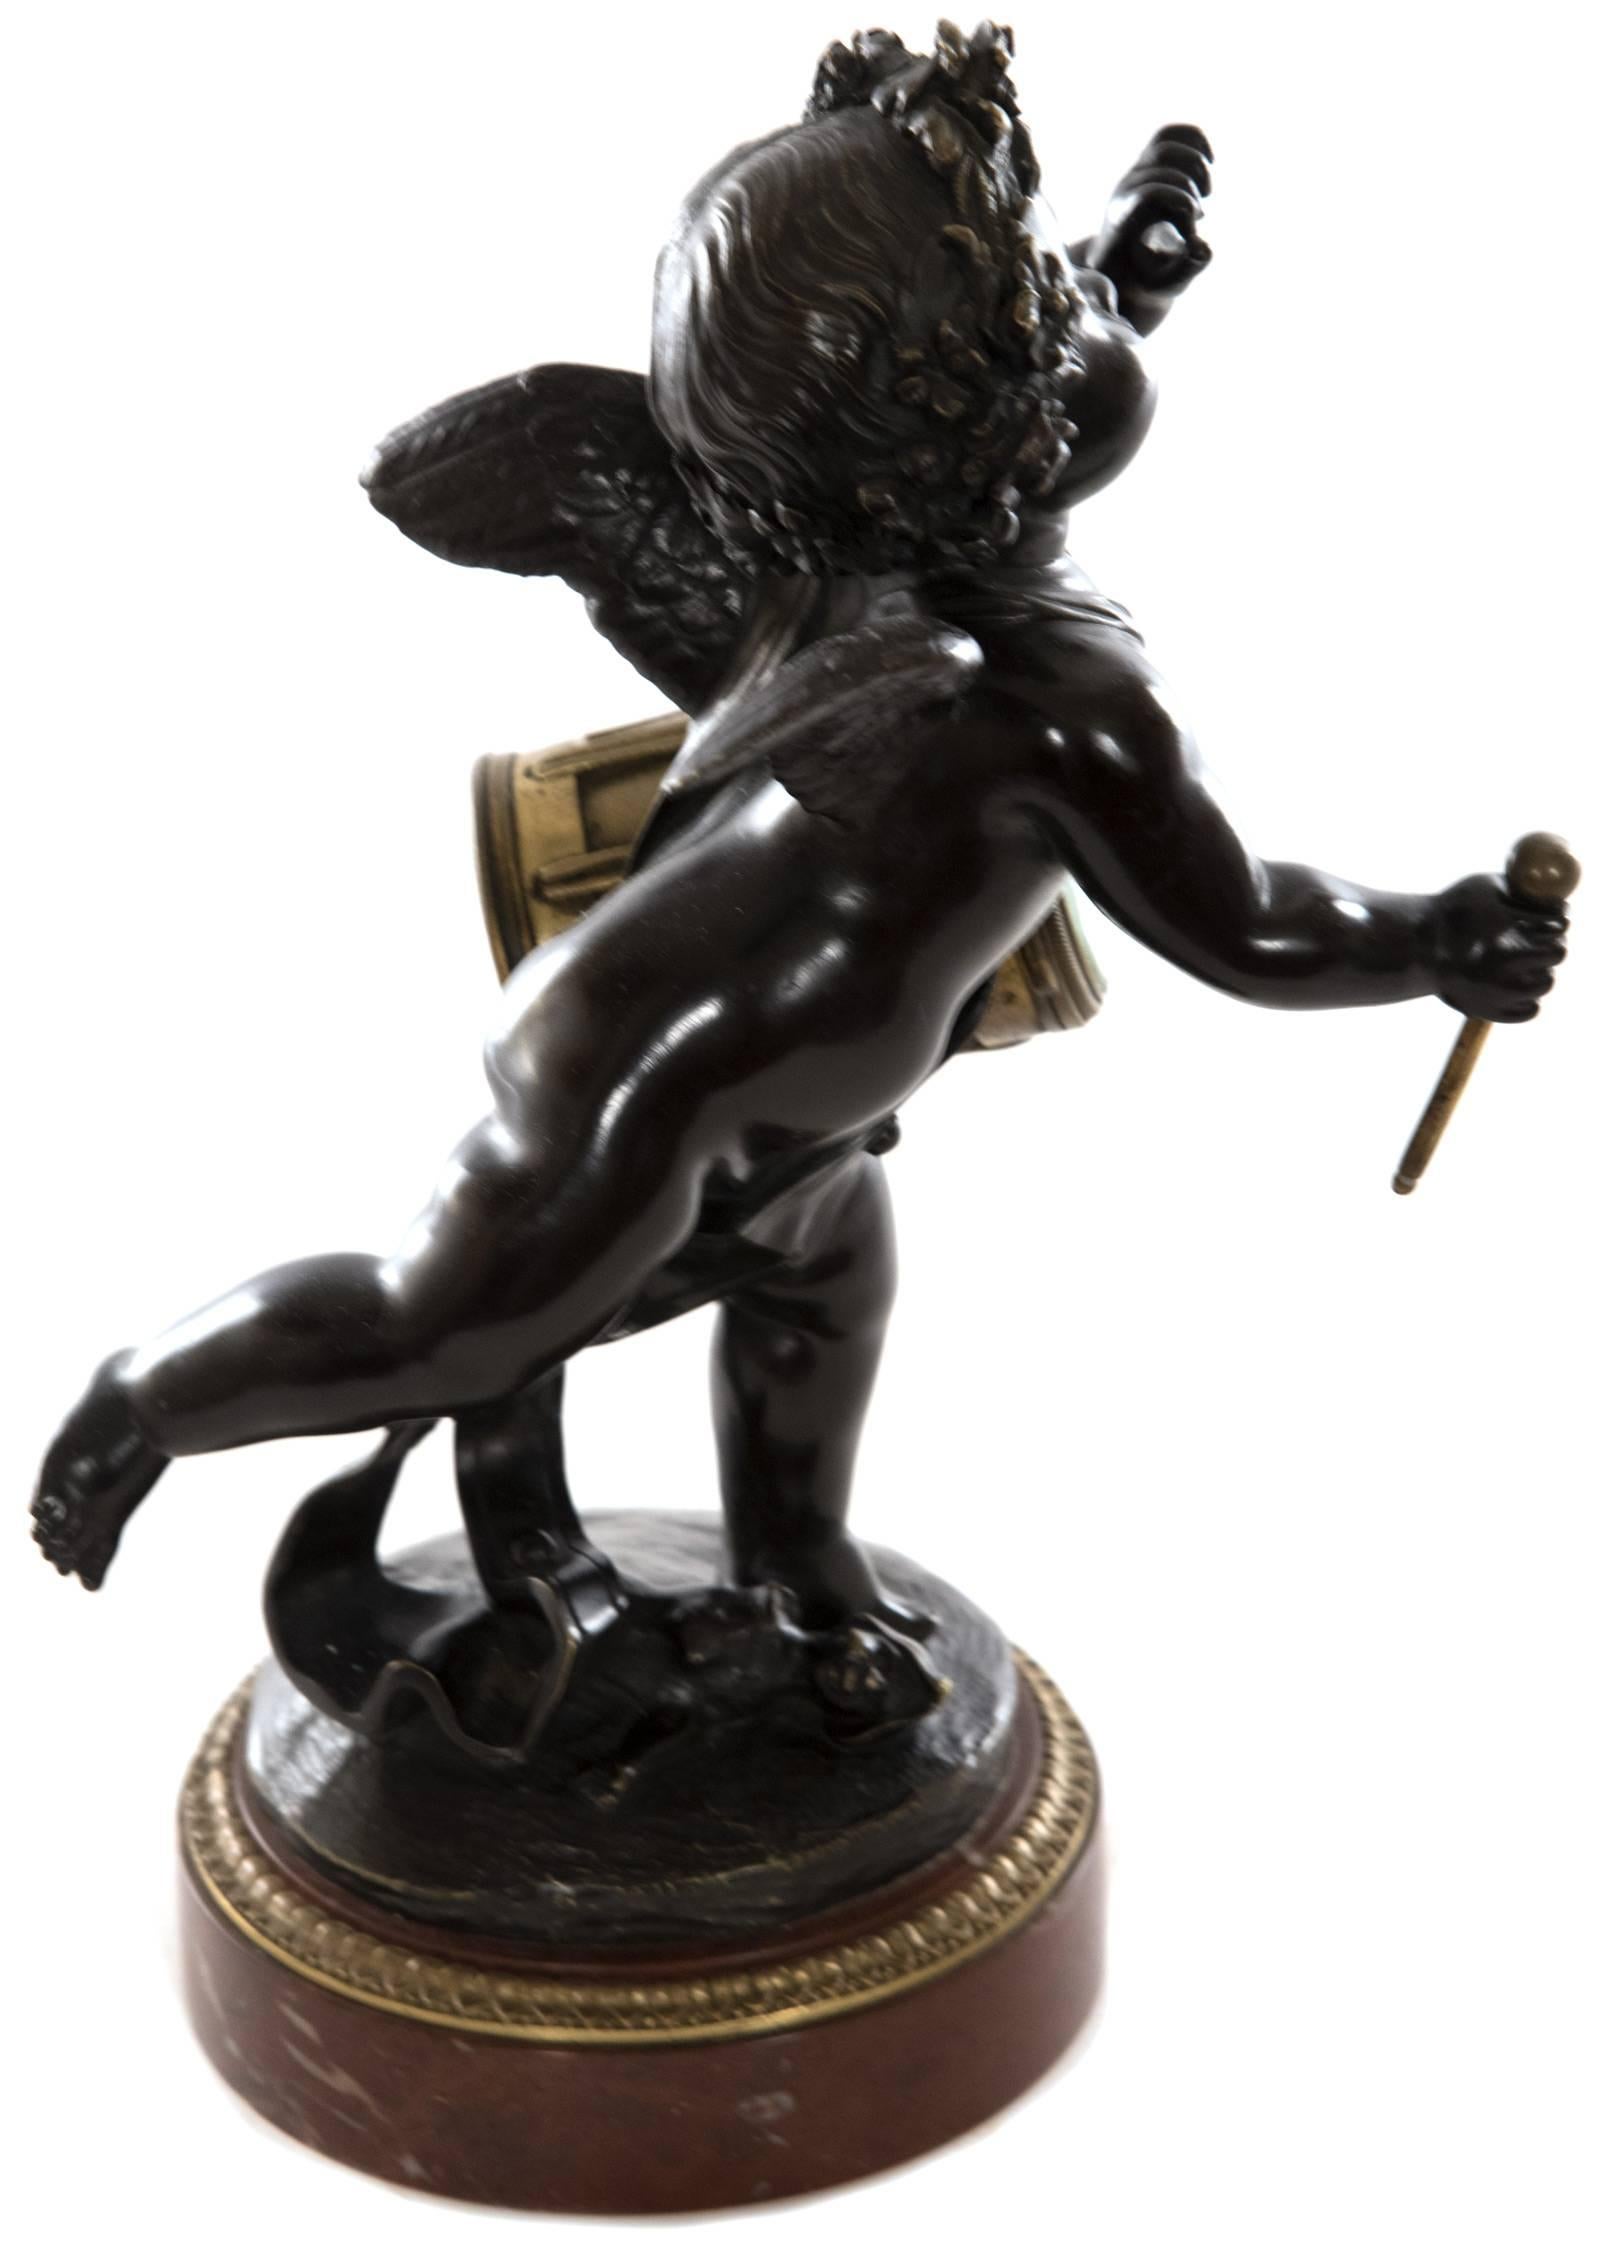 A French bronze desk clock in the form of a cherub holding a drumstick and drum, which encases the clock movements, on a round red marble base. The circular white enamel clock face is delicately decorated with floral swags hung by blue ribbons, with